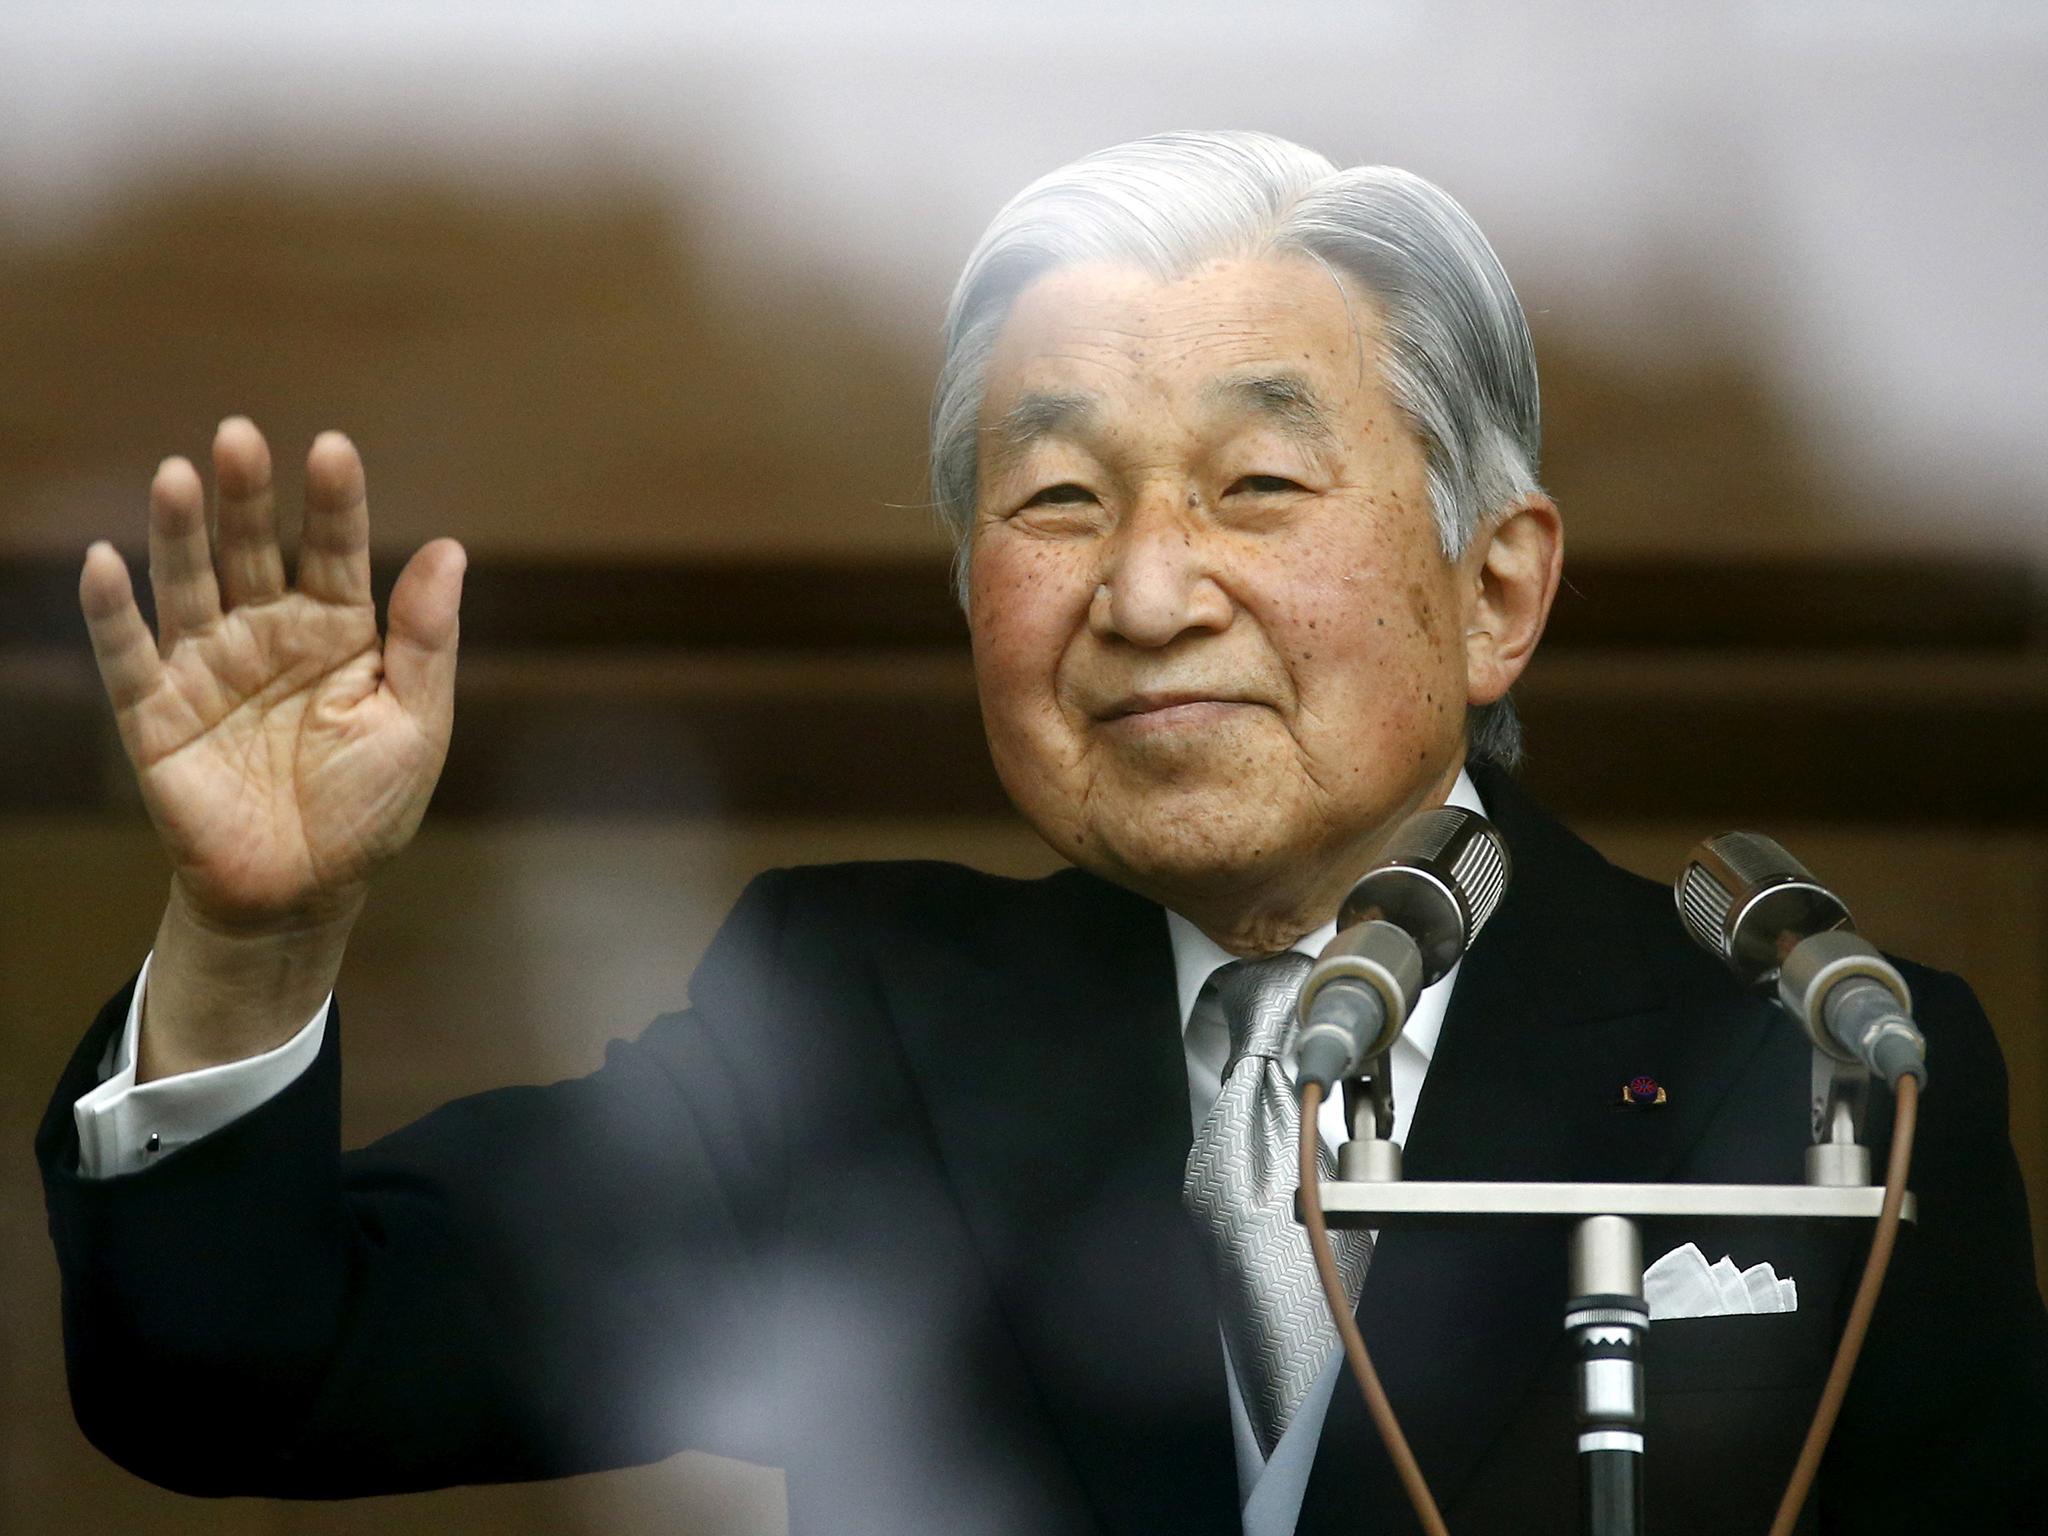 Emperor Akihito, 82, said he is concerned it will become ‘more difficult for me to carry out my duties as the symbol of the state’